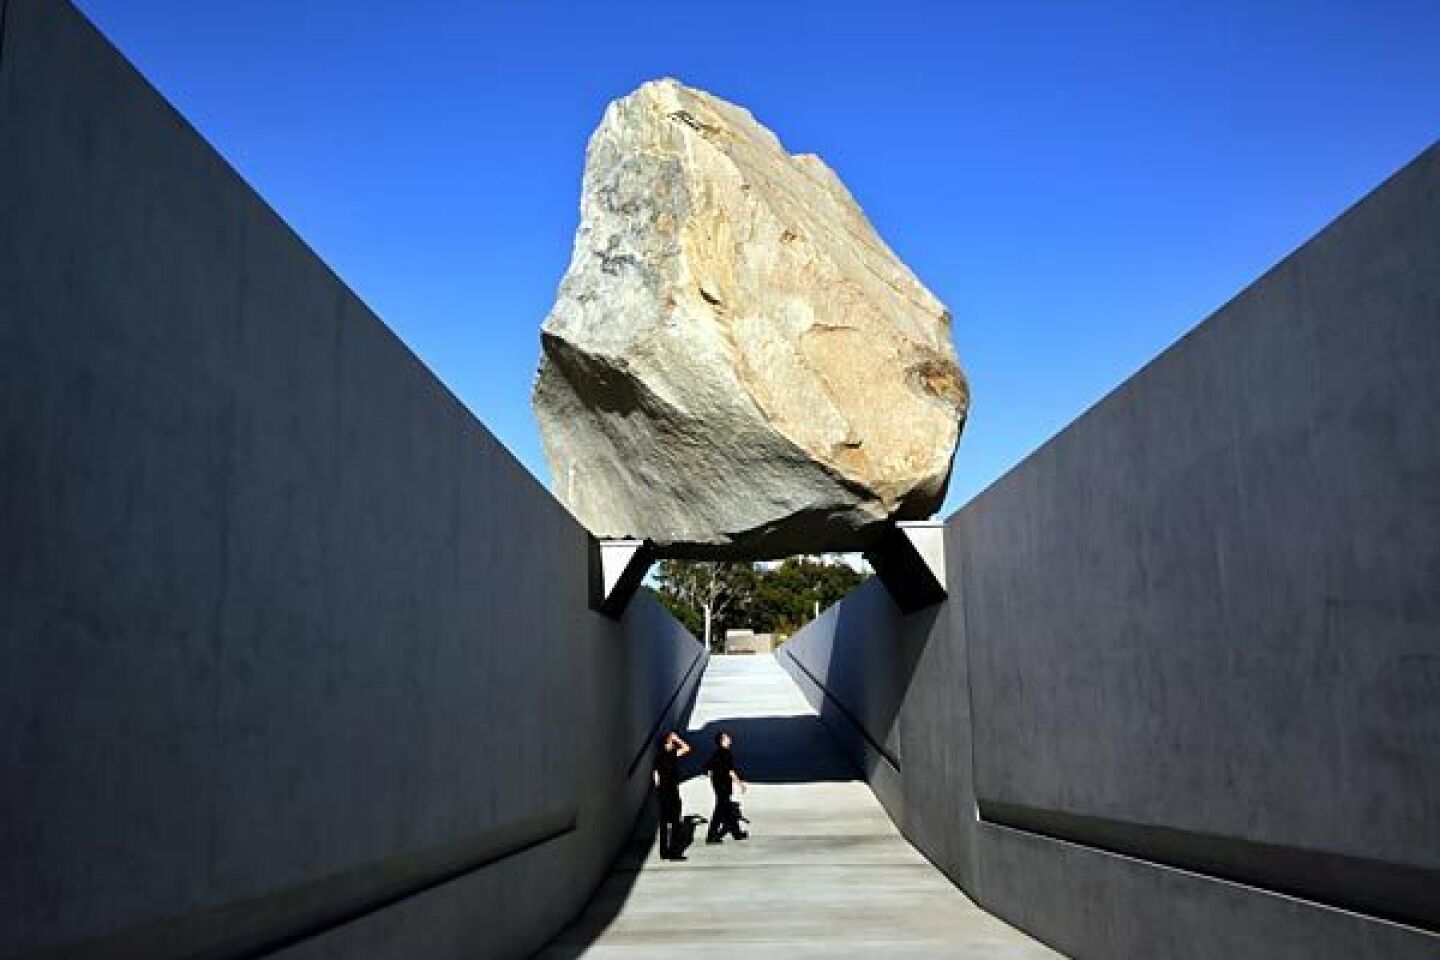 Michael Heizer's 'Levitated Mass' installation opens at LACMA